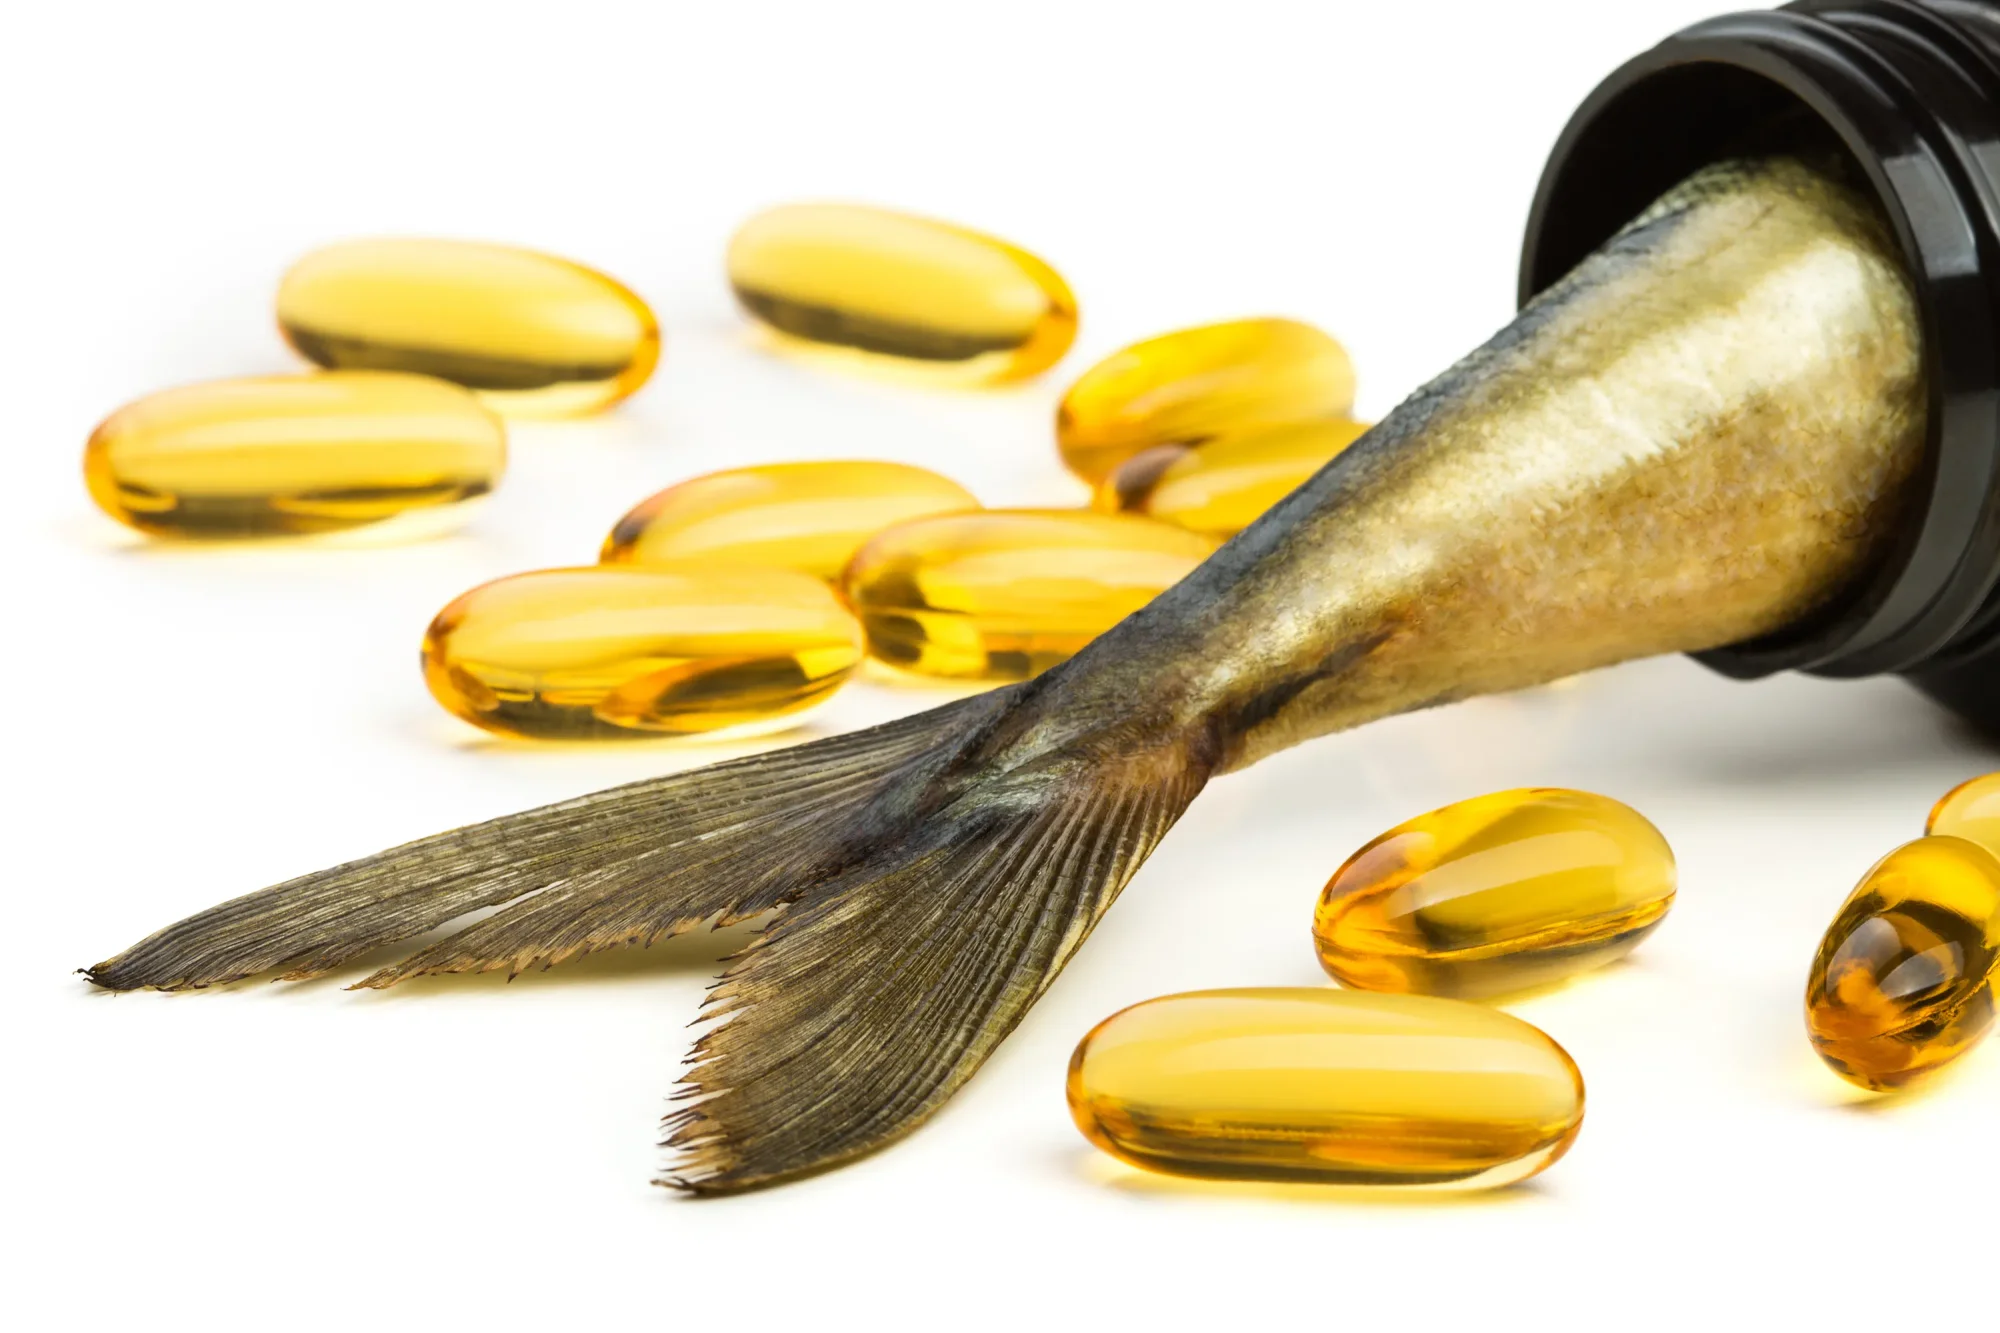 Fish oil capsules scattered about and a fish tail coming out of brown supplement jar.